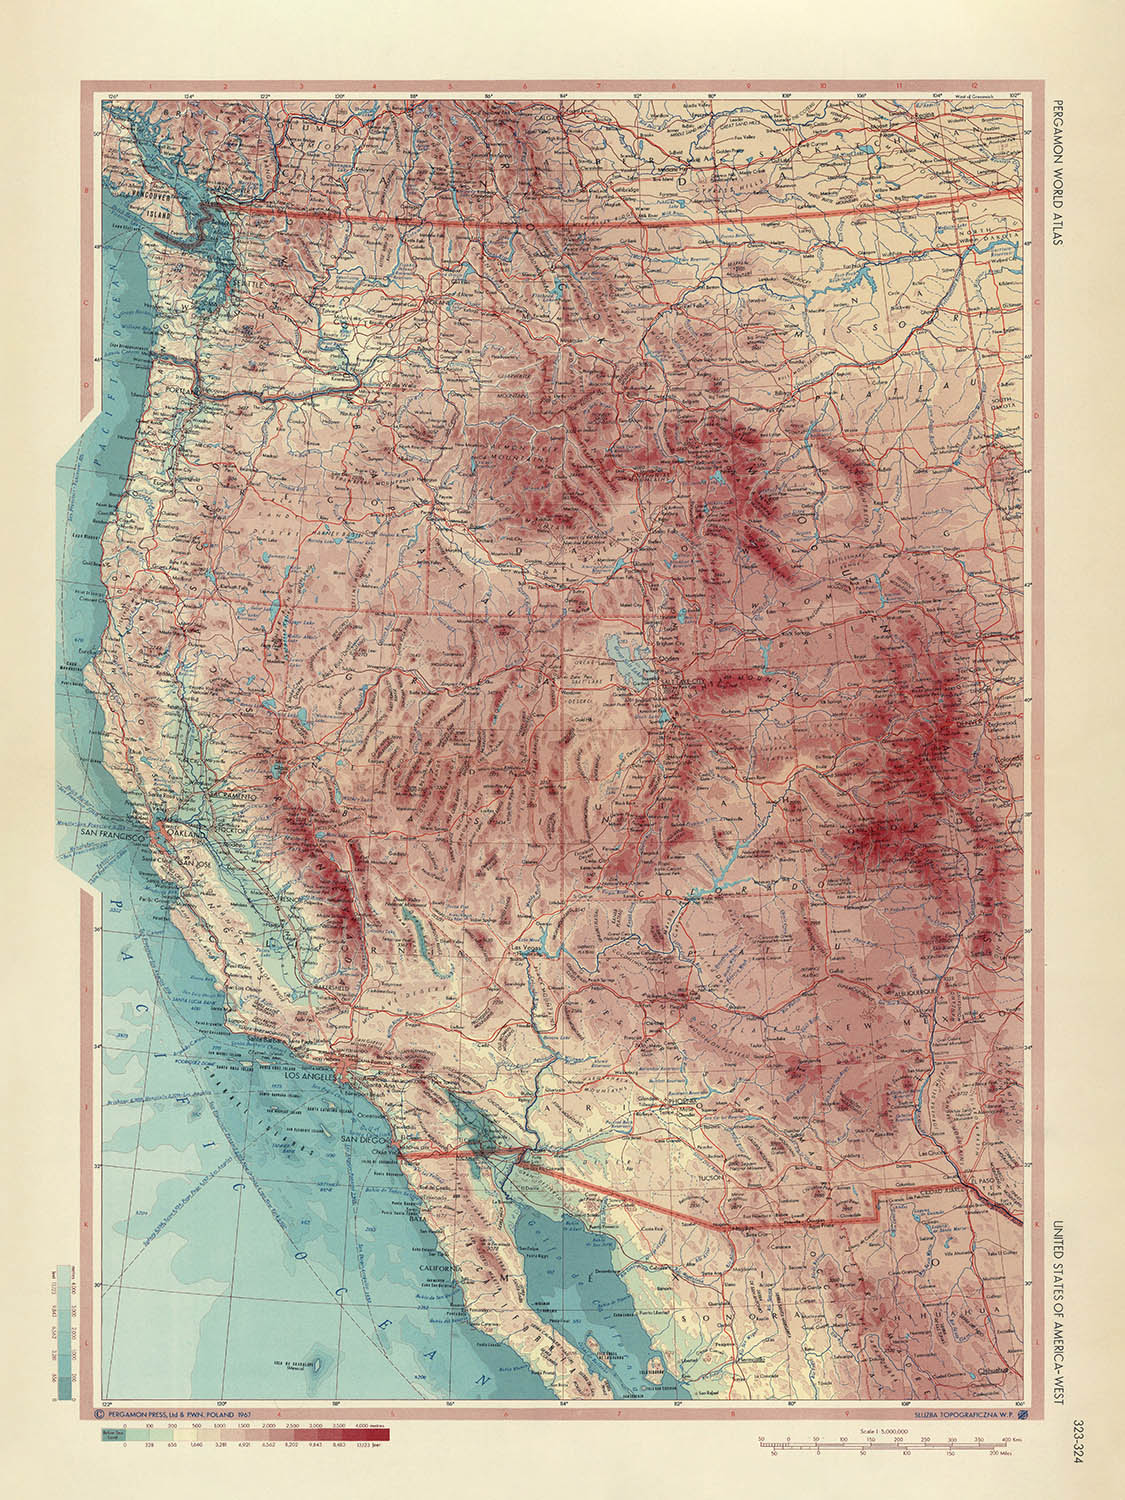 Old Map of Western United States, 1967: Los Angeles, San Francisco, Yosemite, Grand Canyon, Rocky Mountains